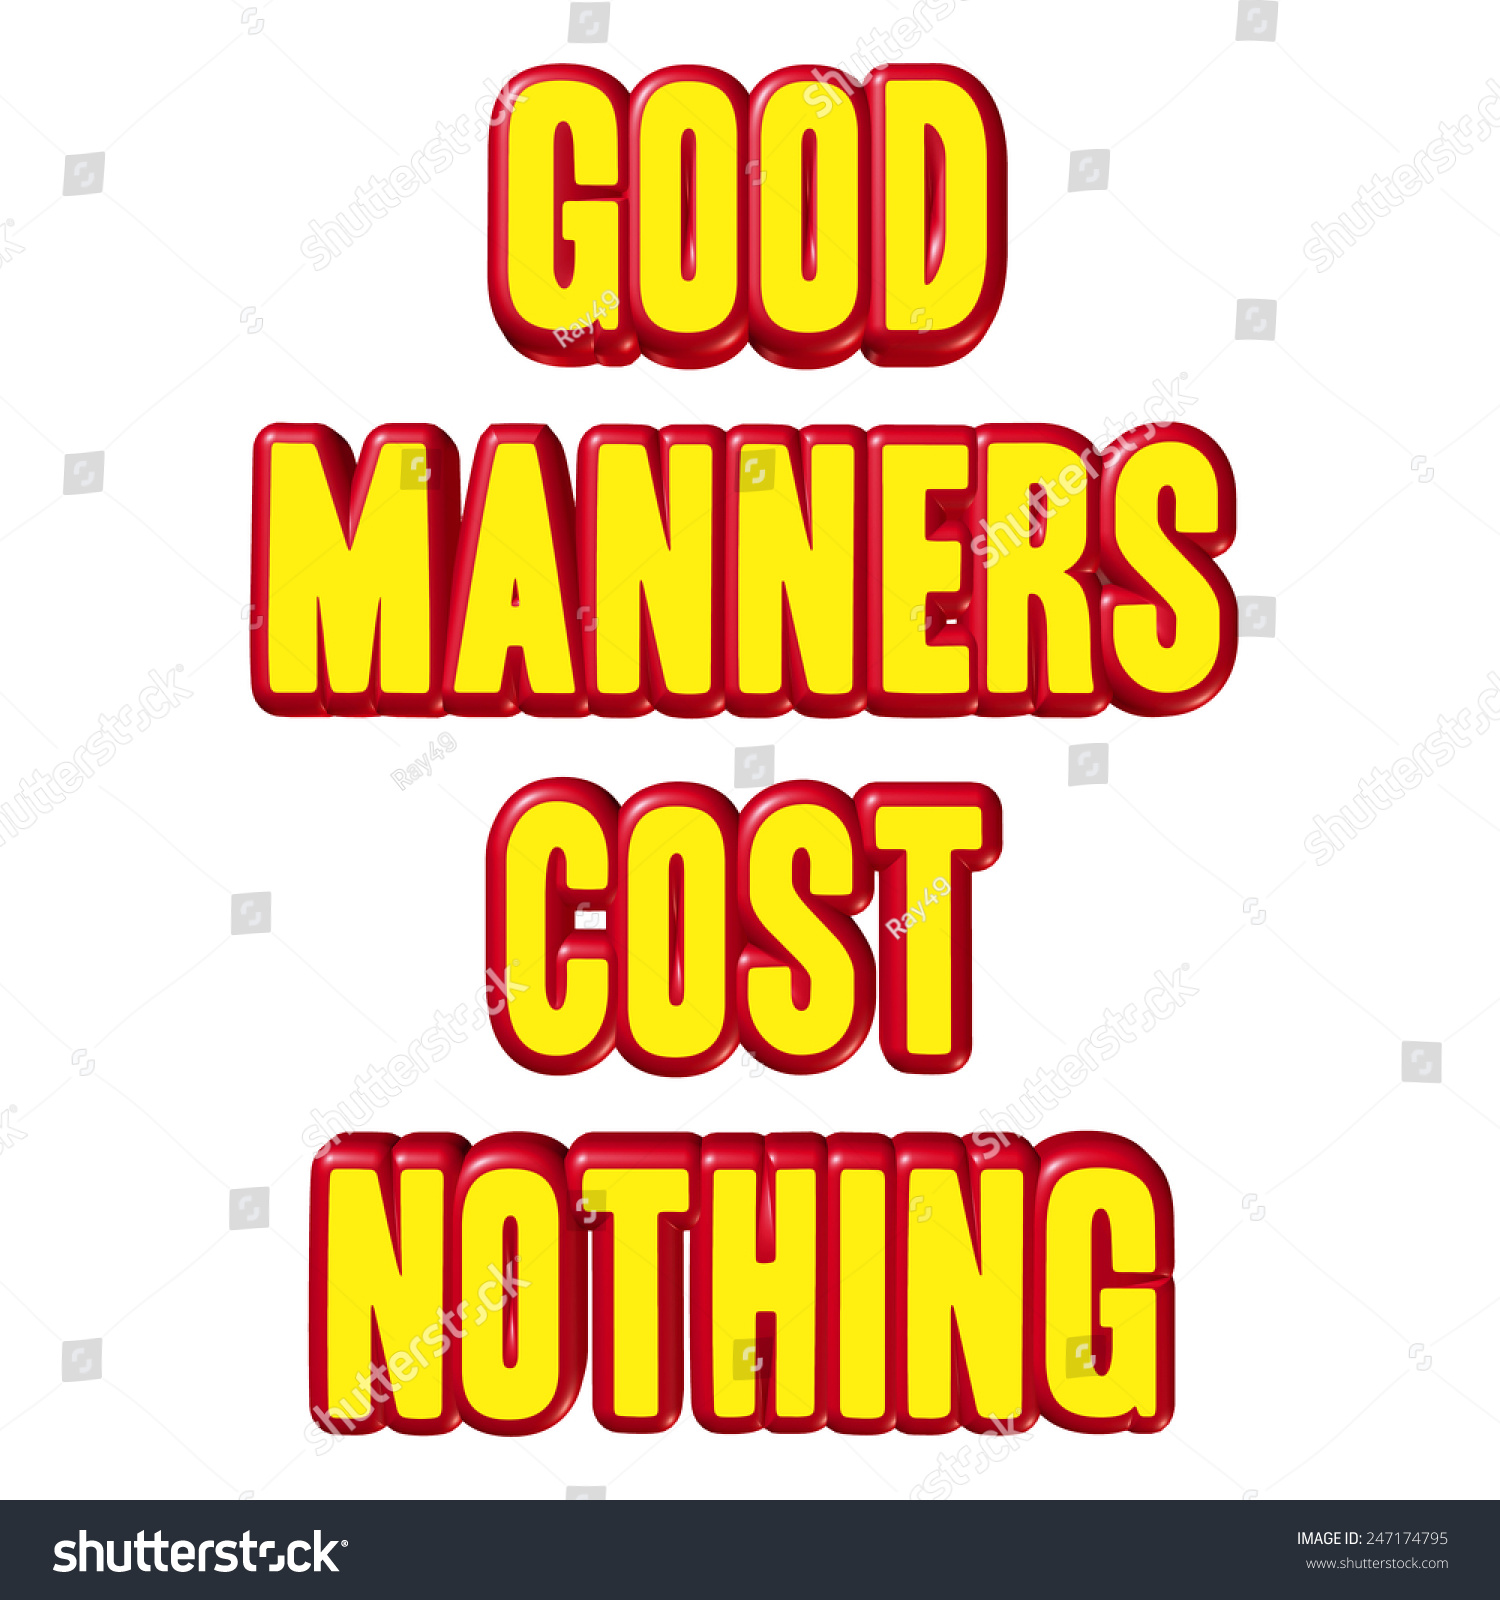 clip art on good manners - photo #25